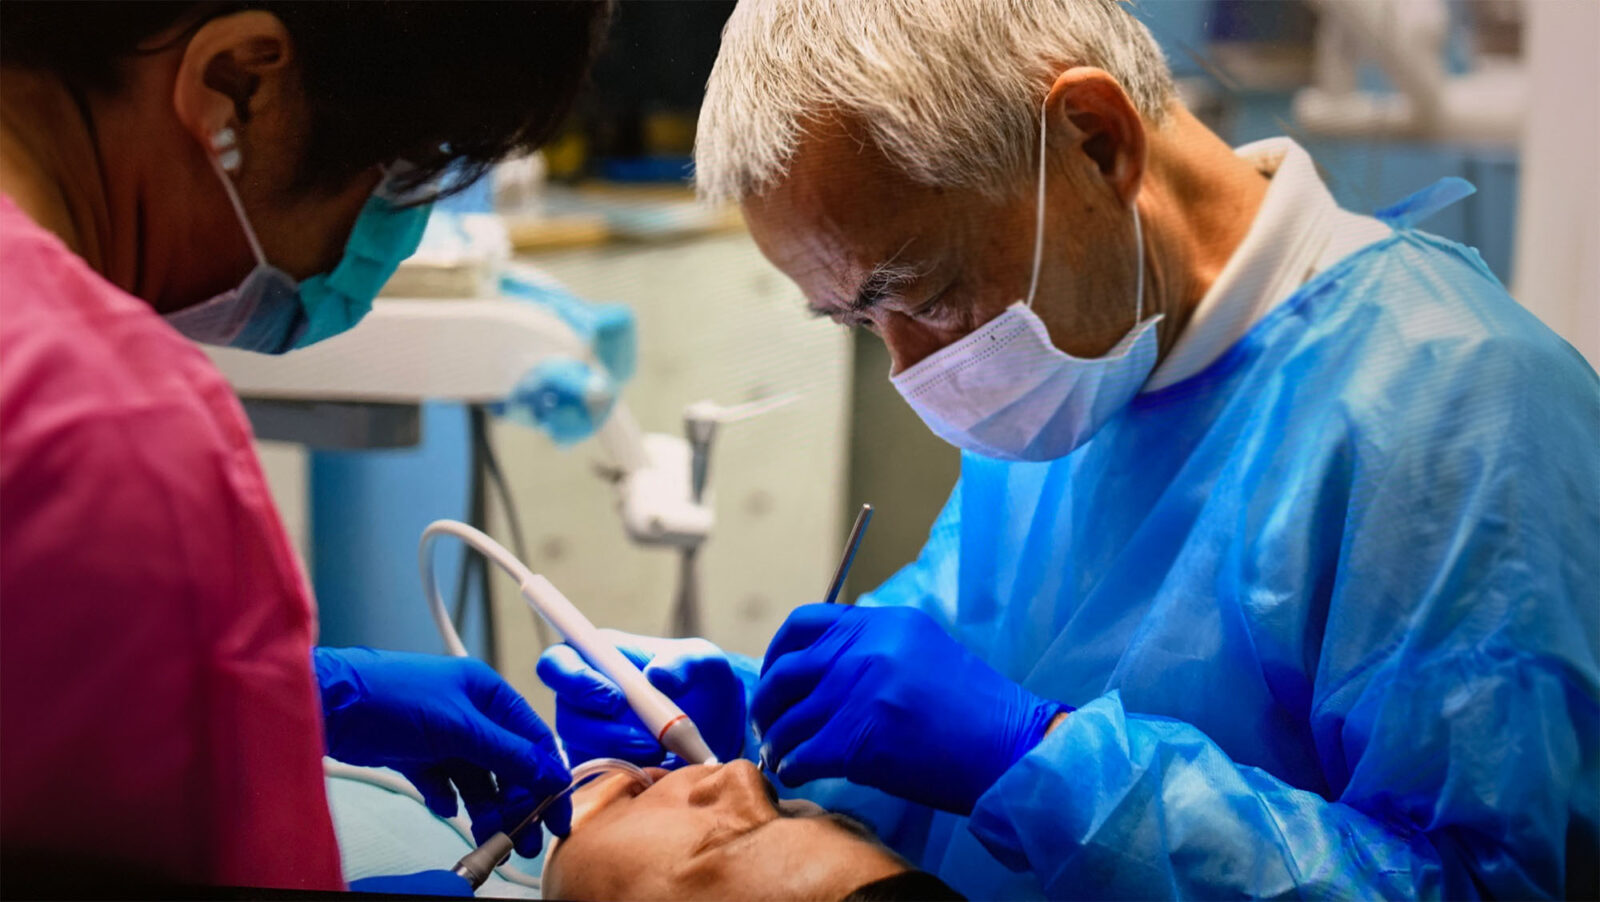 Dr. Lawrence Lai treats people's teeth at a free clinic.